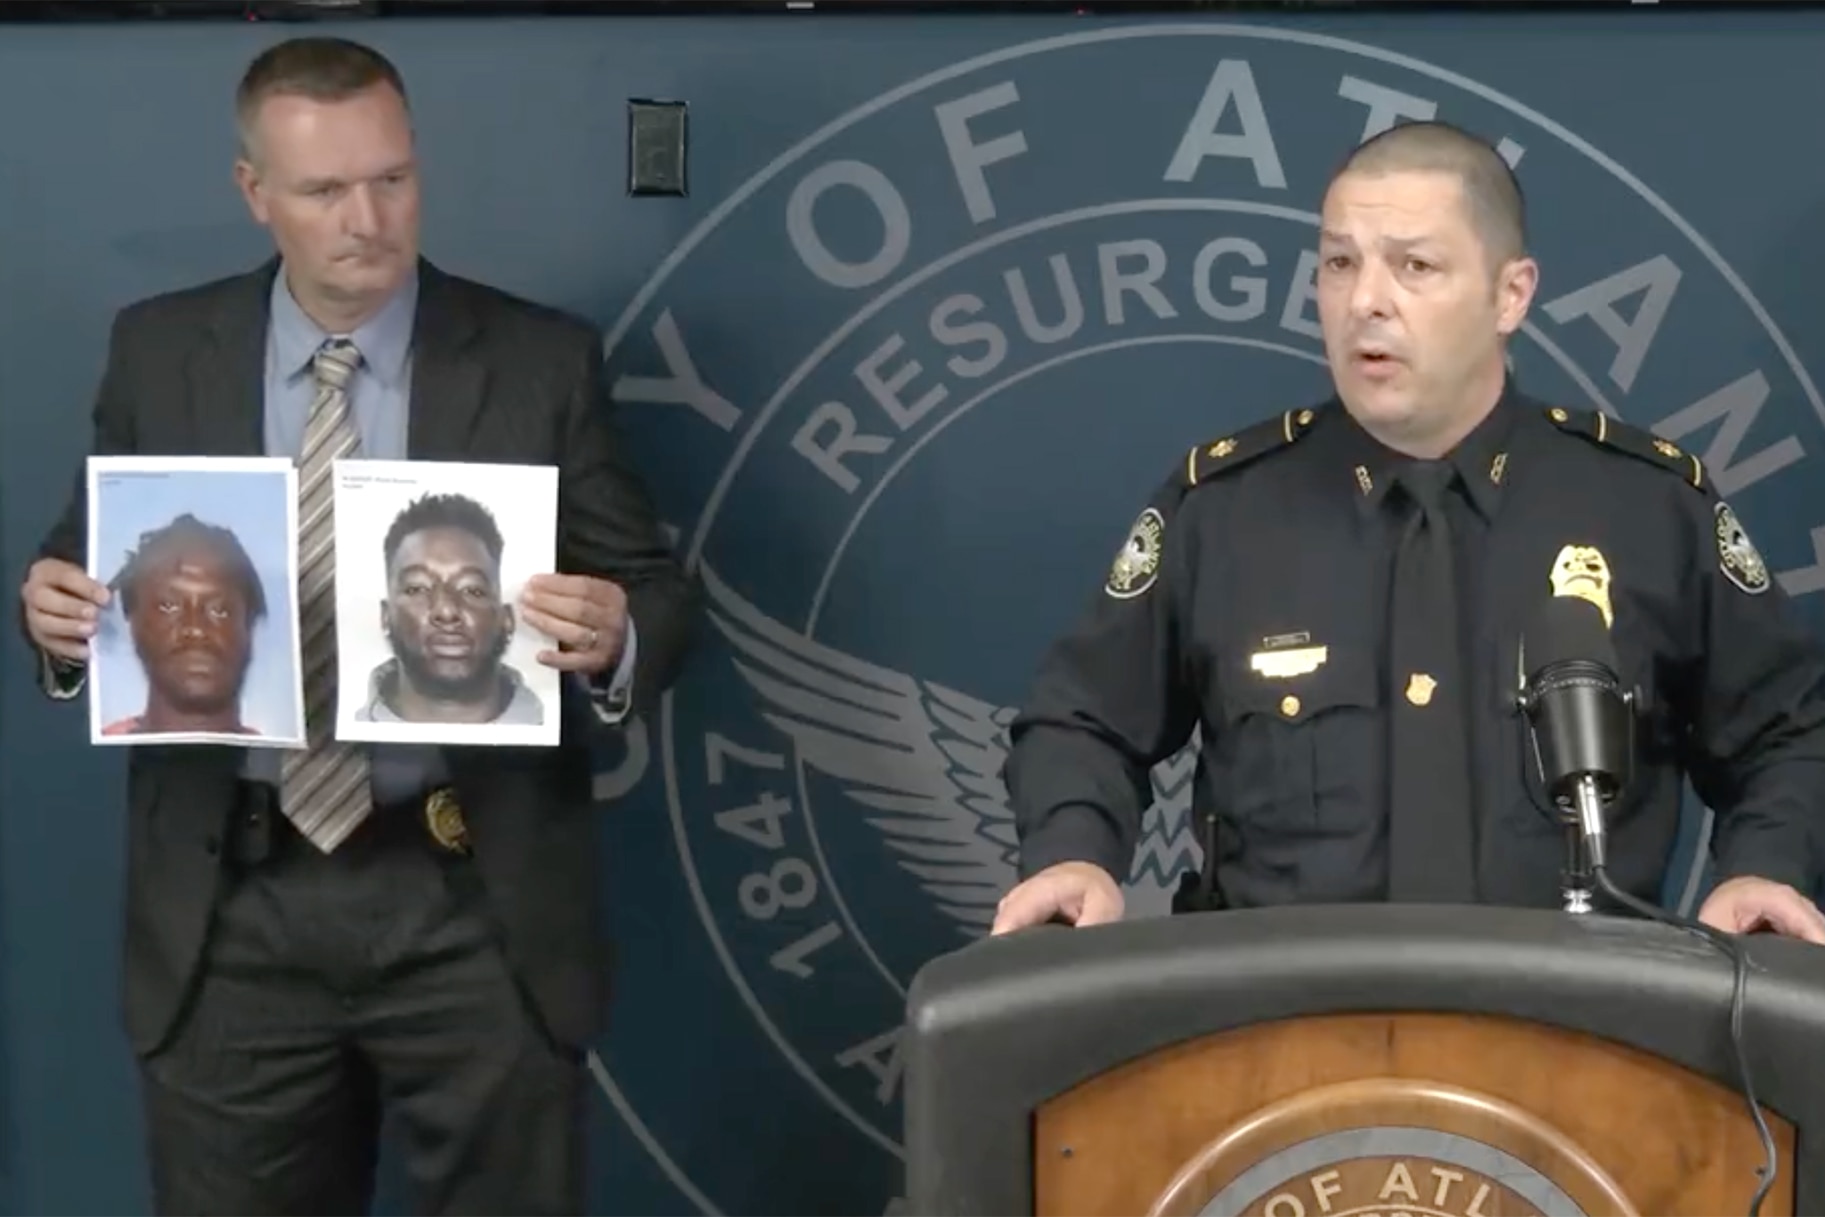 An update on the suspects in the case of missing woman Allahnia Lenoir